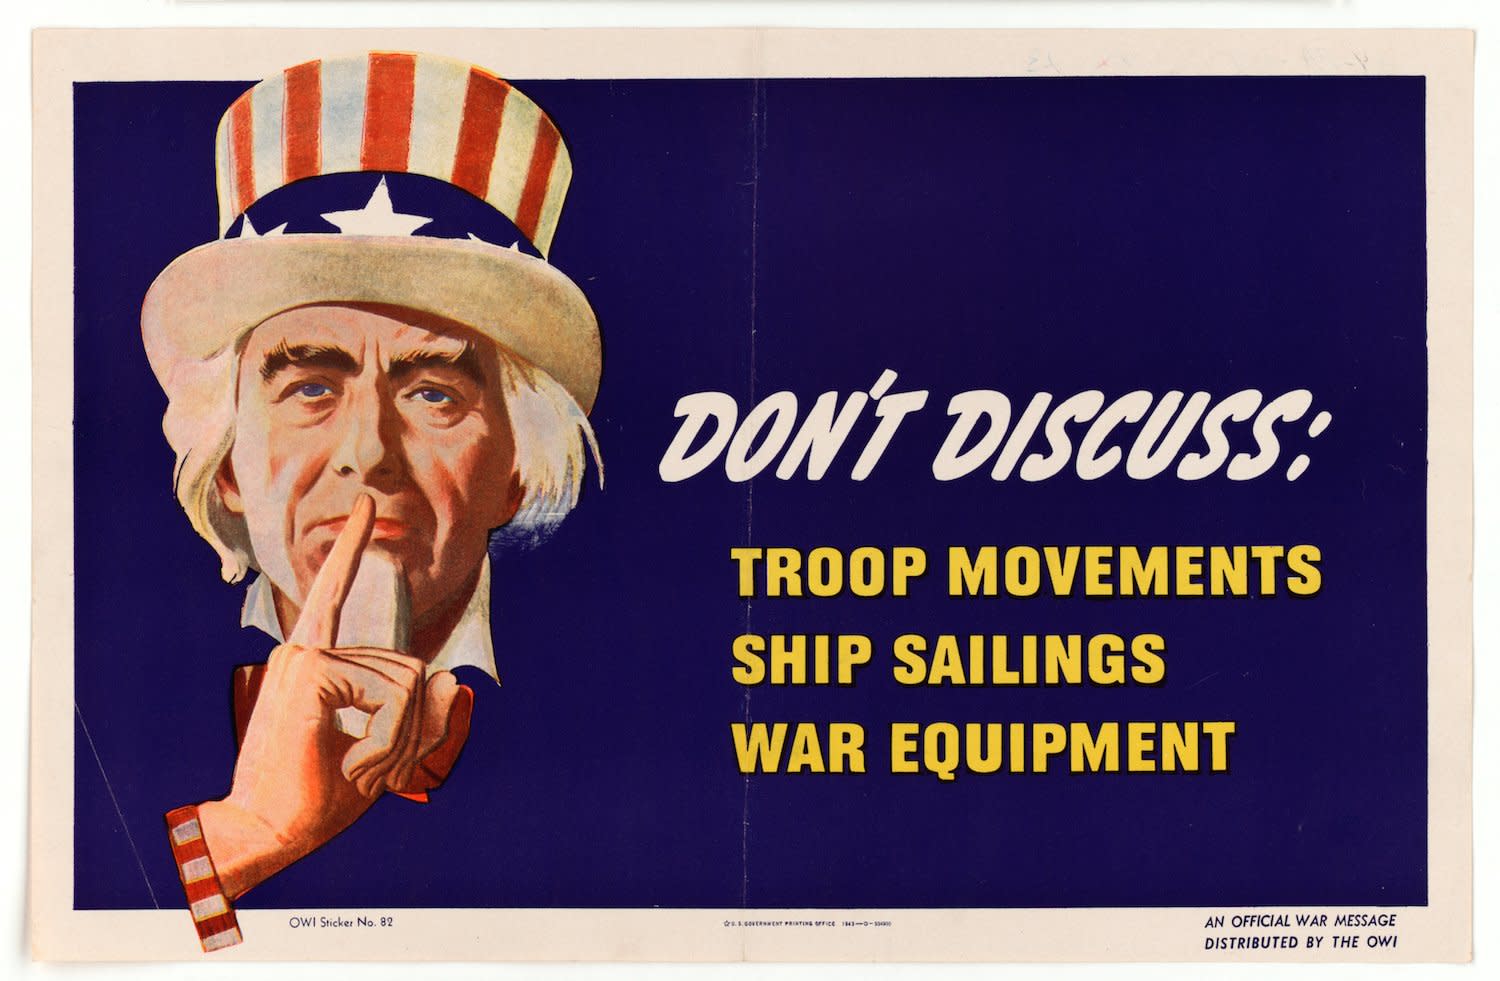 See The Loose Lips Sink Ships Propaganda Posters Of World